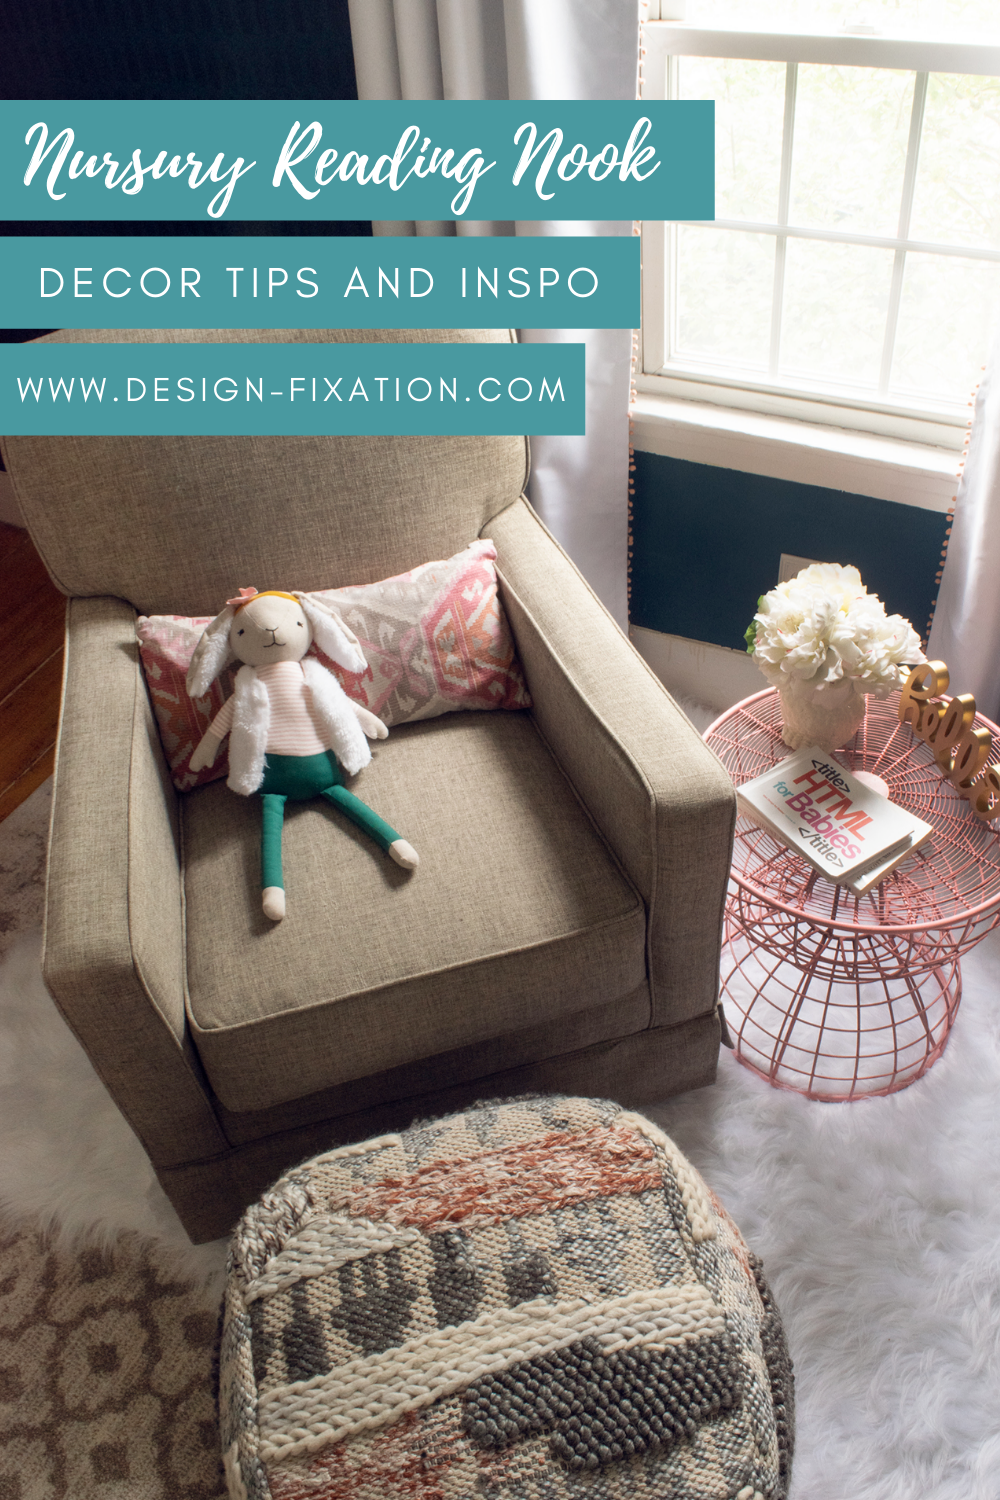 How To Create The Perfect Nursery Reading Nook /// By Design Fixation #baby #sophisticated #decor